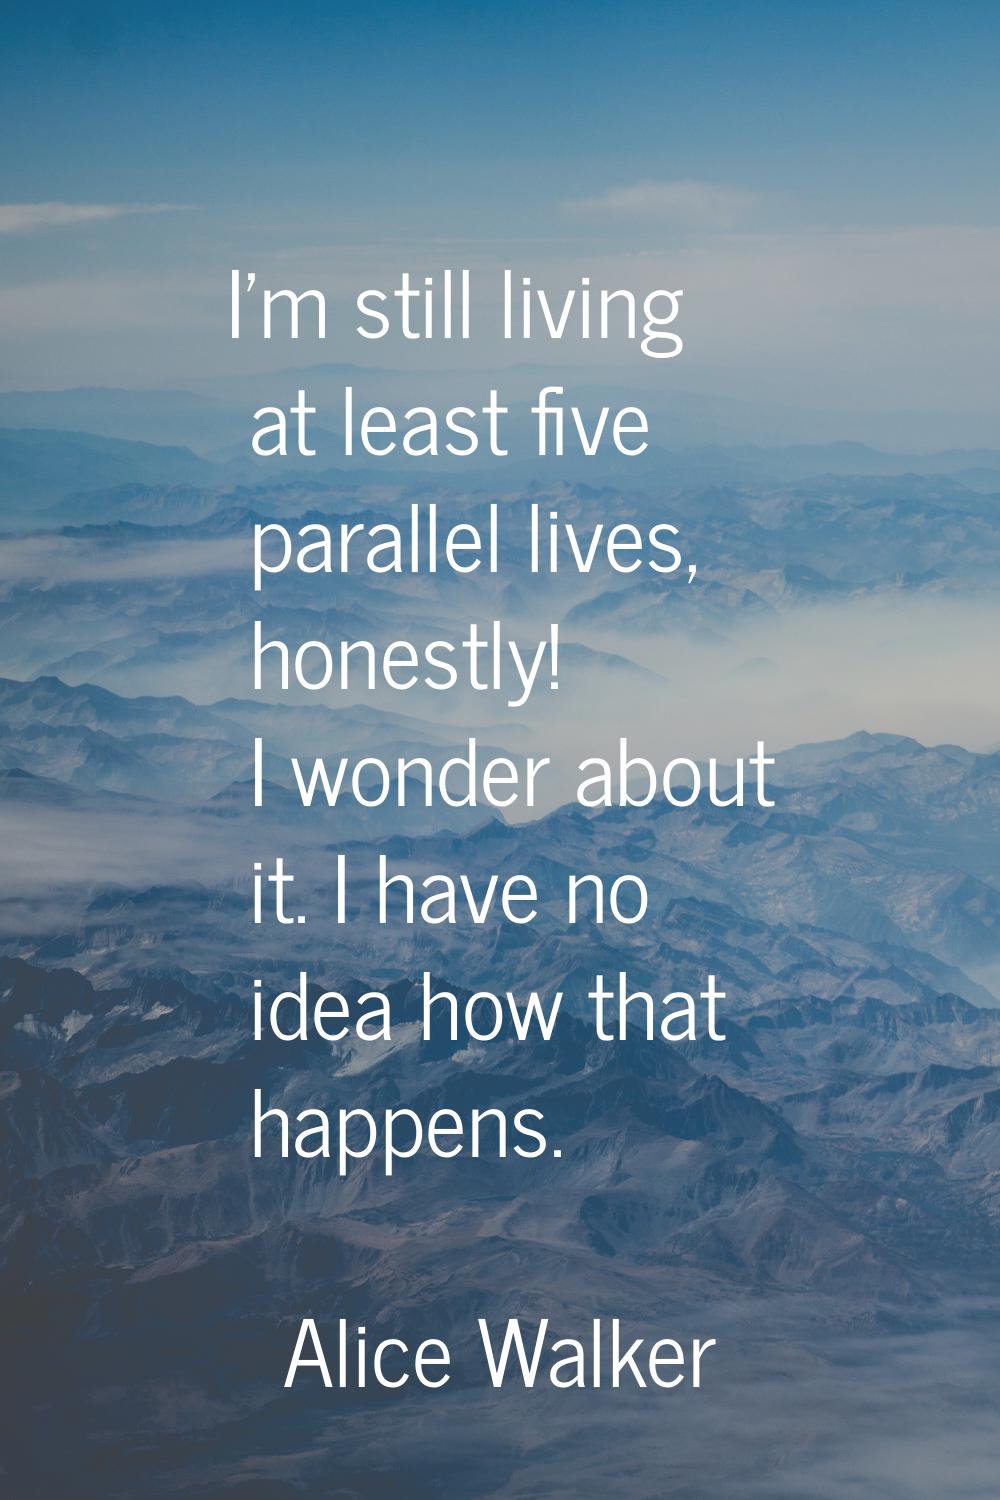 I'm still living at least five parallel lives, honestly! I wonder about it. I have no idea how that